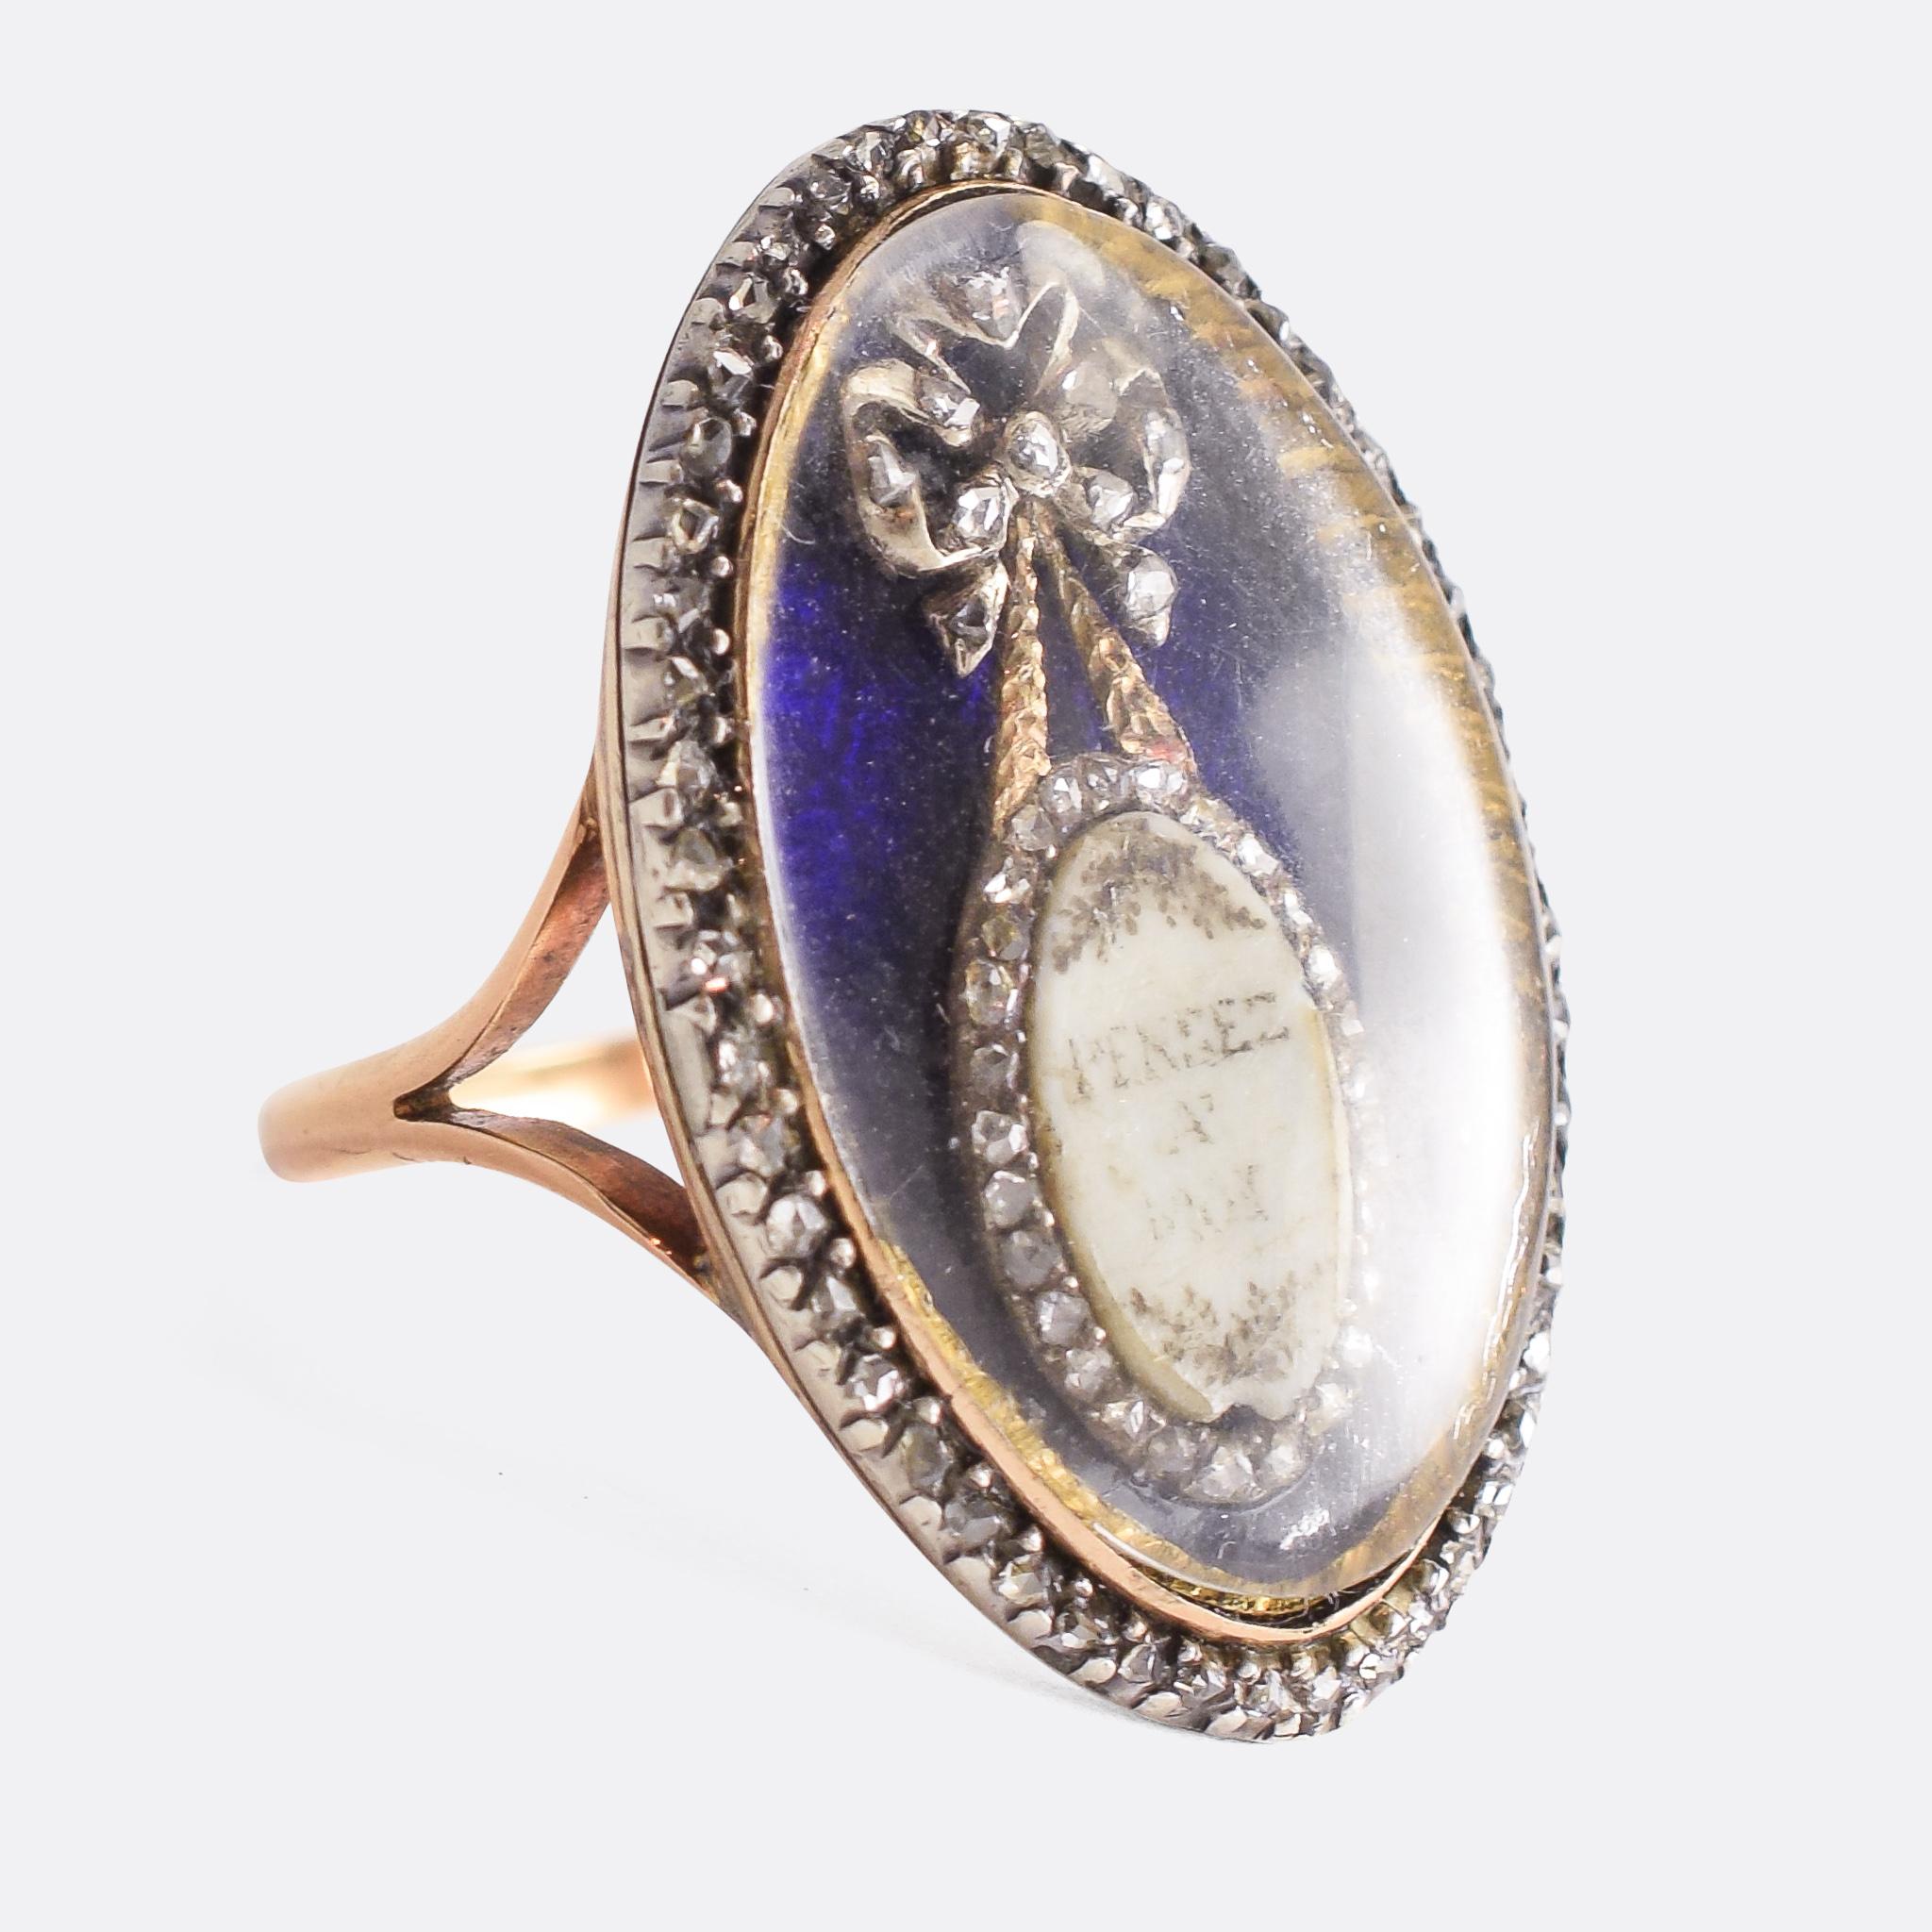 A stunning 18th Century navette memorial ring dating from circa 1780. Behind a domed glass compartment is a diamond-set bow beneath which hangs a plaque with the words PENSEZ A MOI, or Think of Me. The head is bordered with rose cut diamonds, and